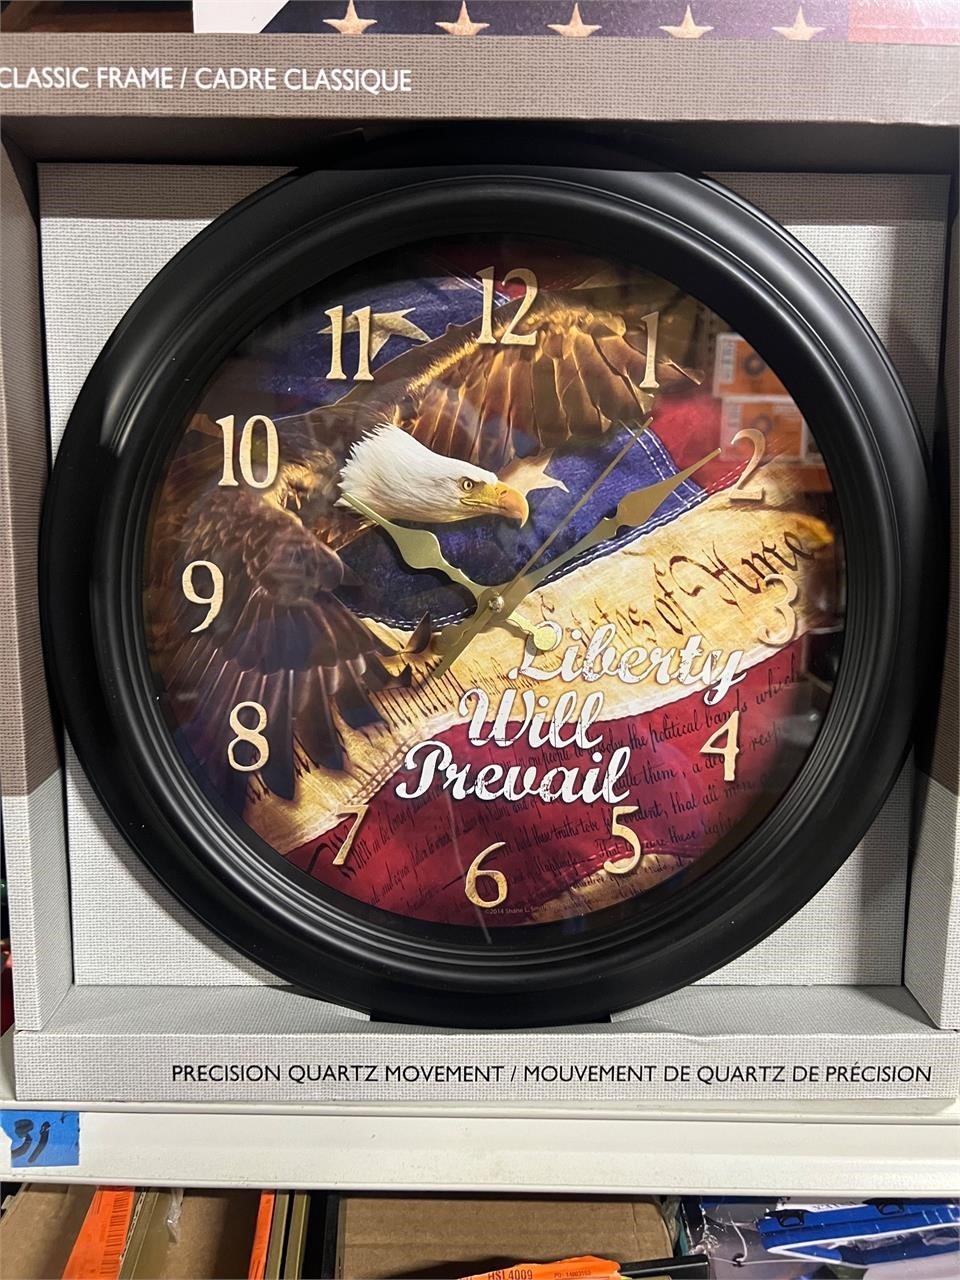 Liberty will prevail wall clock